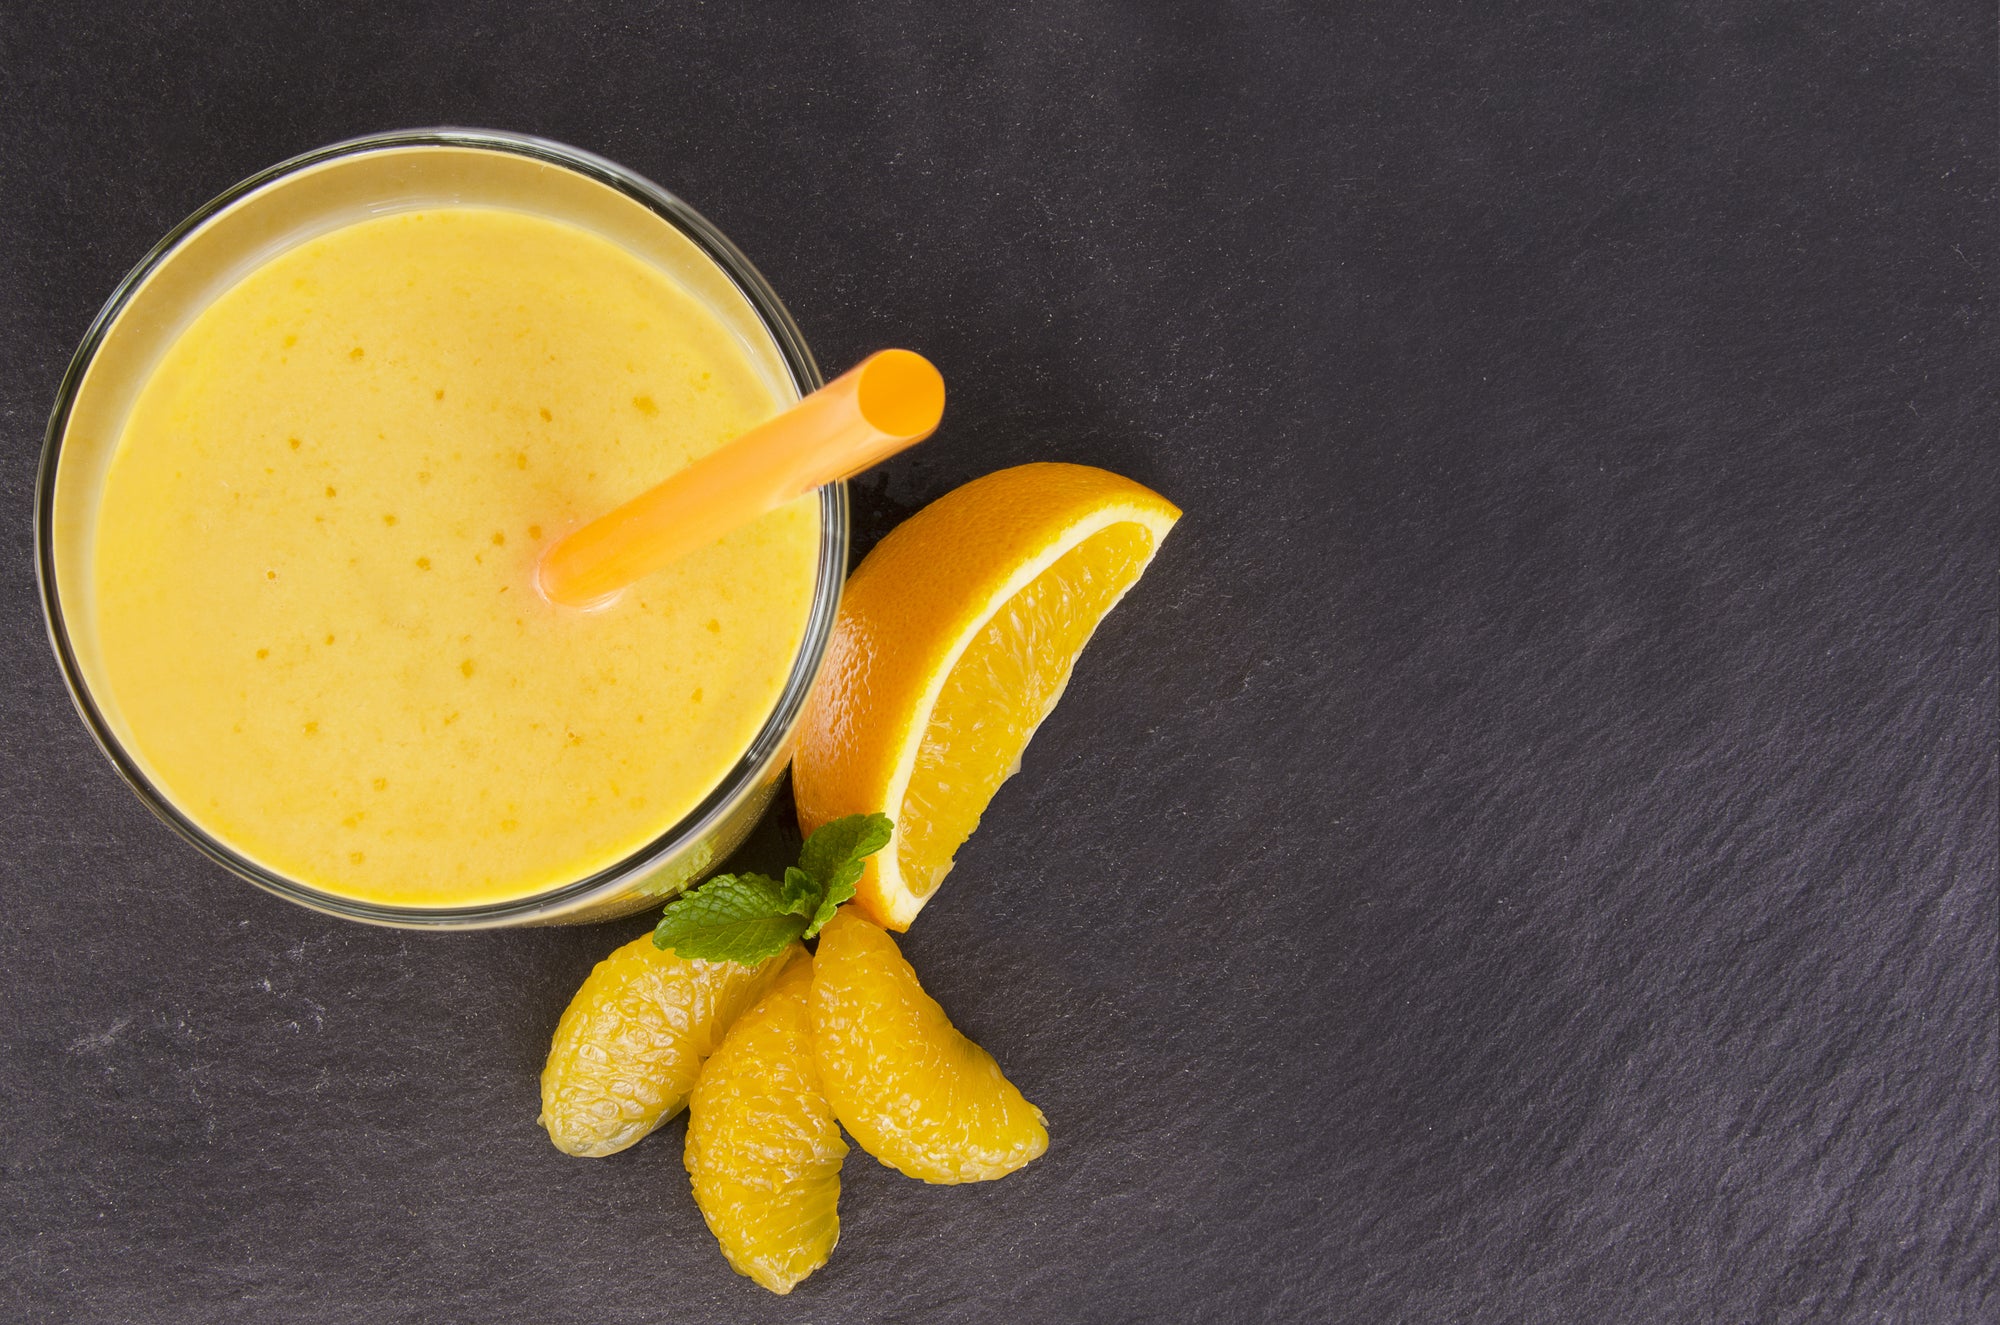 top view shot of a glass of Citrus Immunity smoothie with a yellow straw beside orange slices on a black surface.